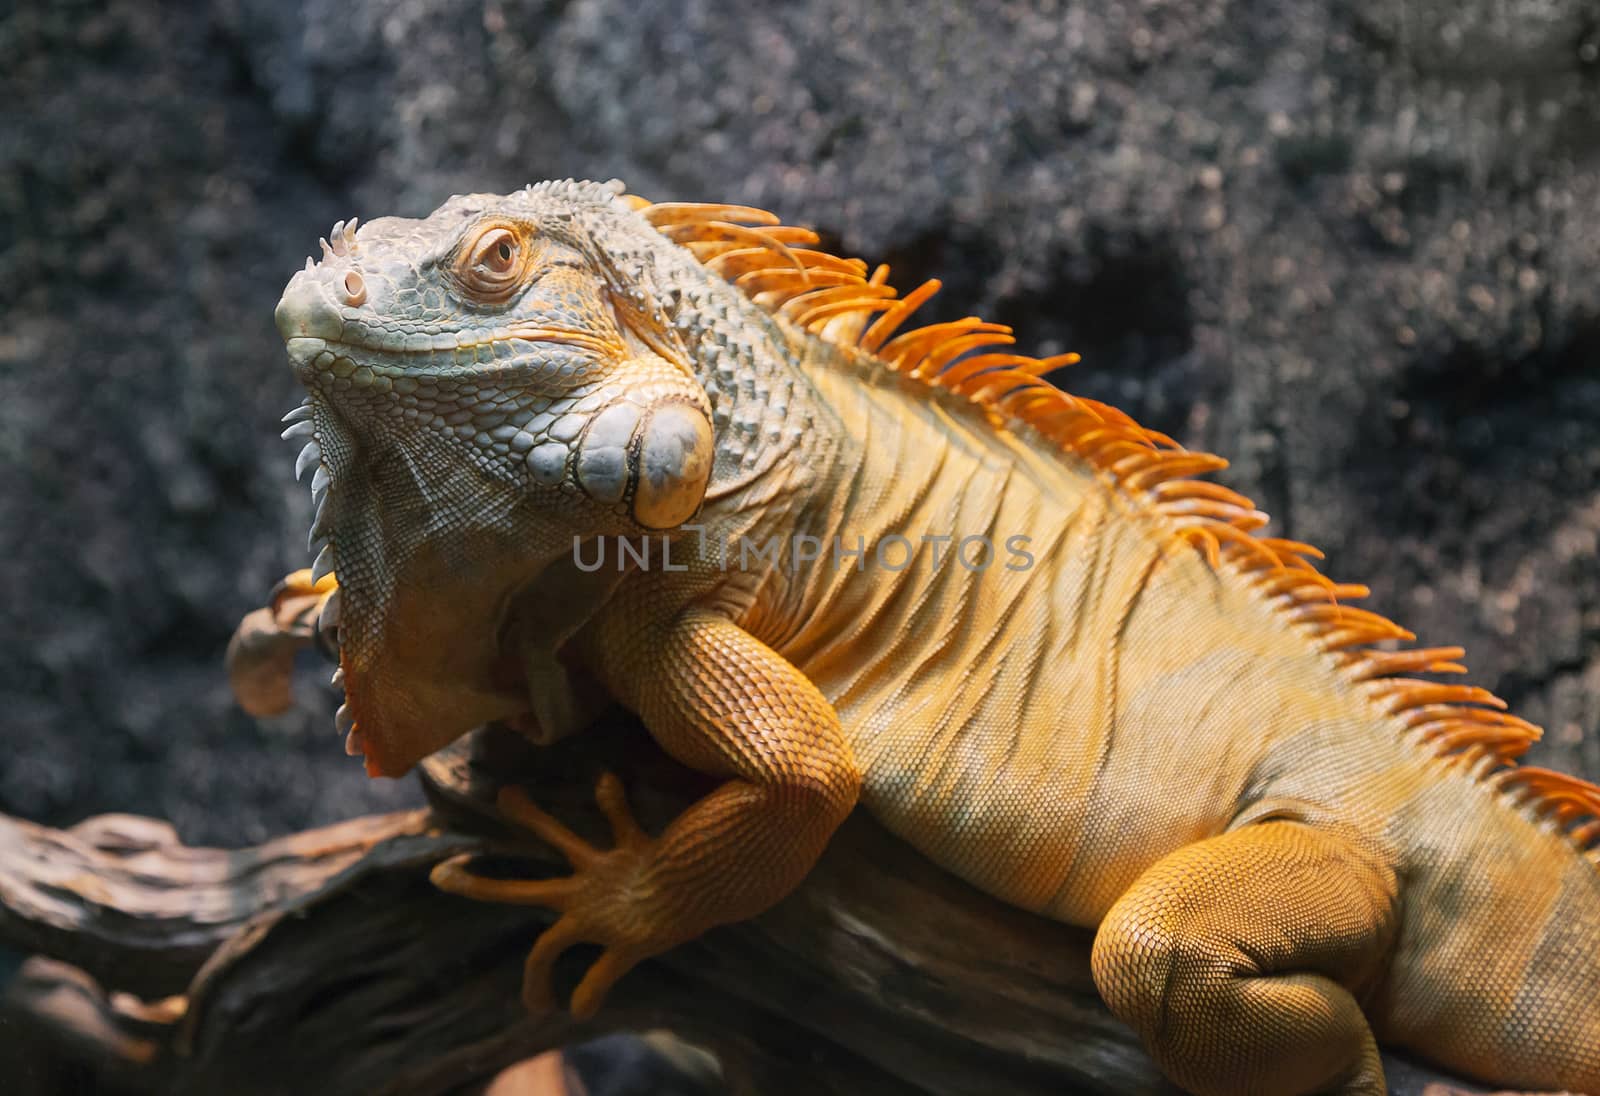 Close-up of a red iguana against grey blurred background